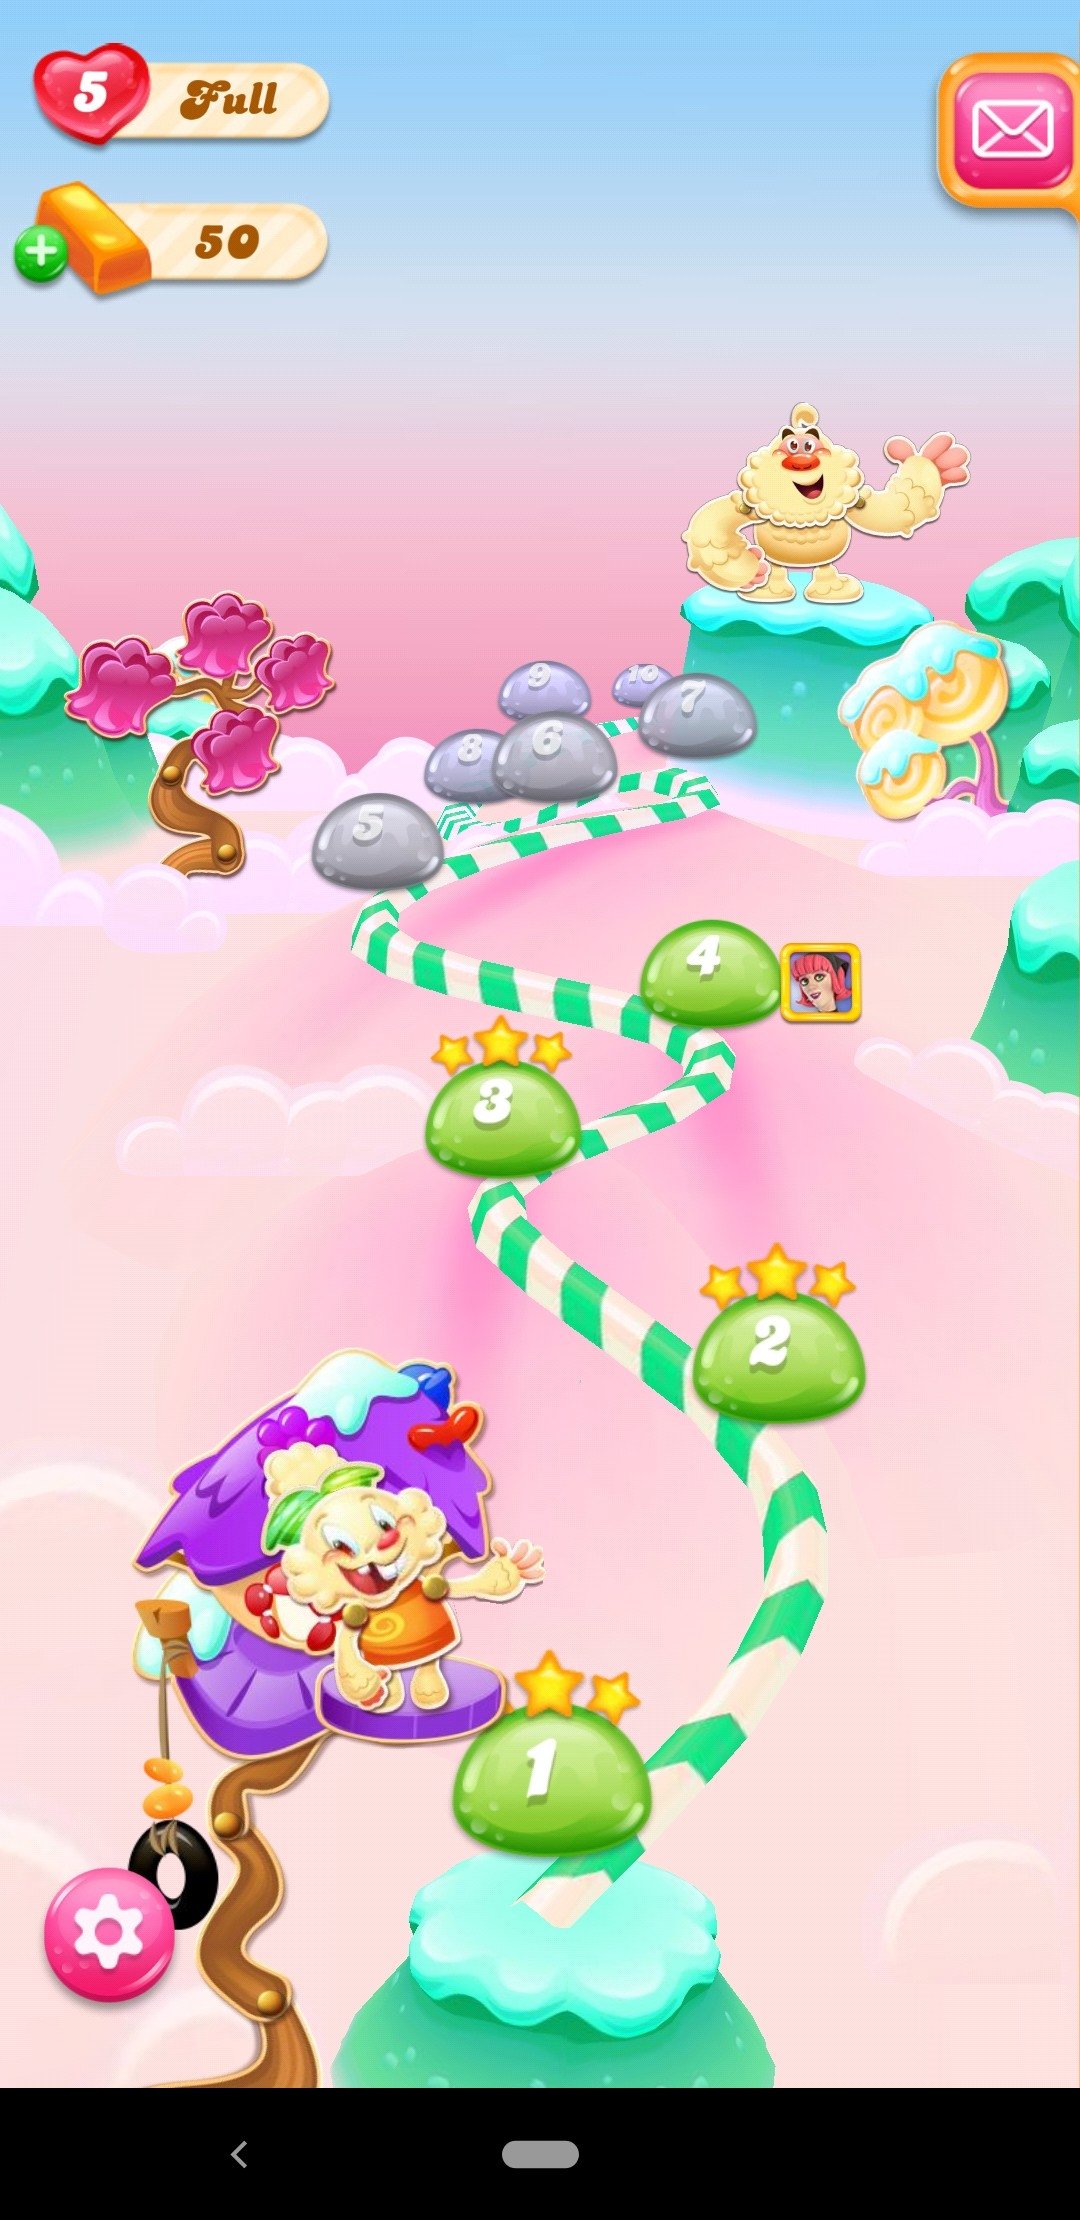 Download Candy Crush Jelly Saga for Android - MajorGeeks